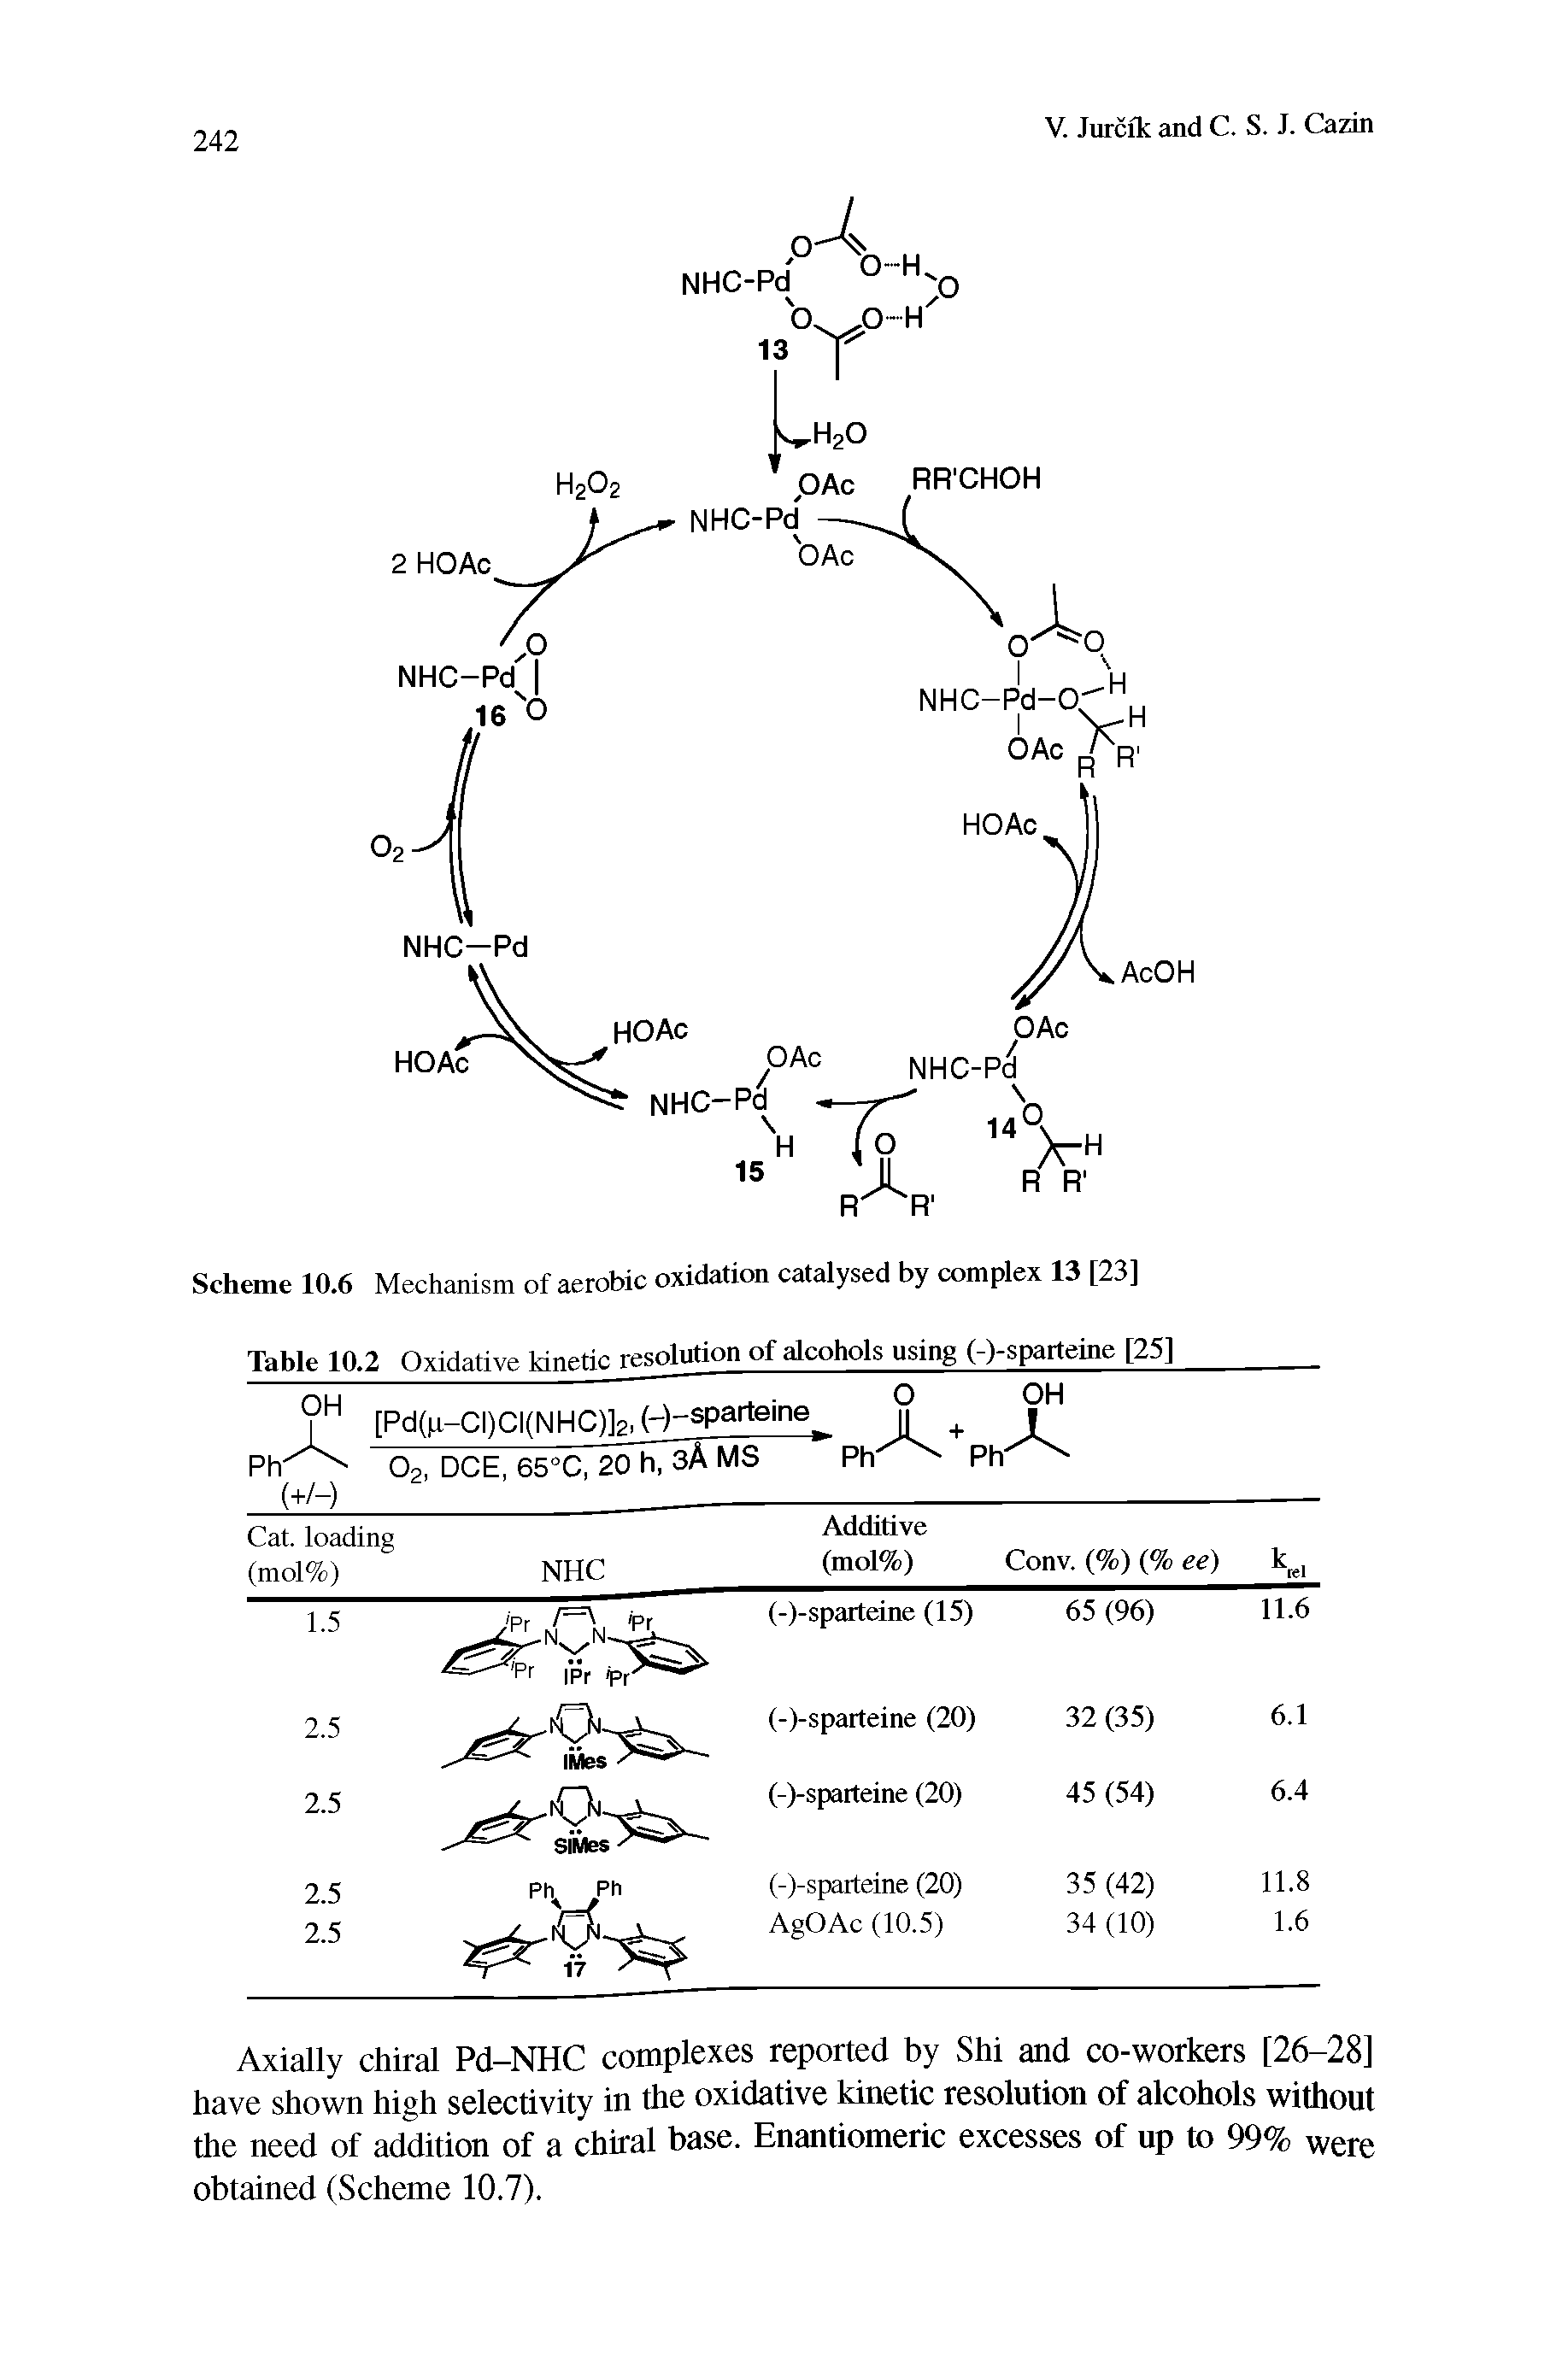 Scheme 10.6 Mechanism of aerobic oxidation catalysed by complex 13 [23] Table 10.2 Oxidative kinetic resolution of alcohols using (-)-sparteine [25]...